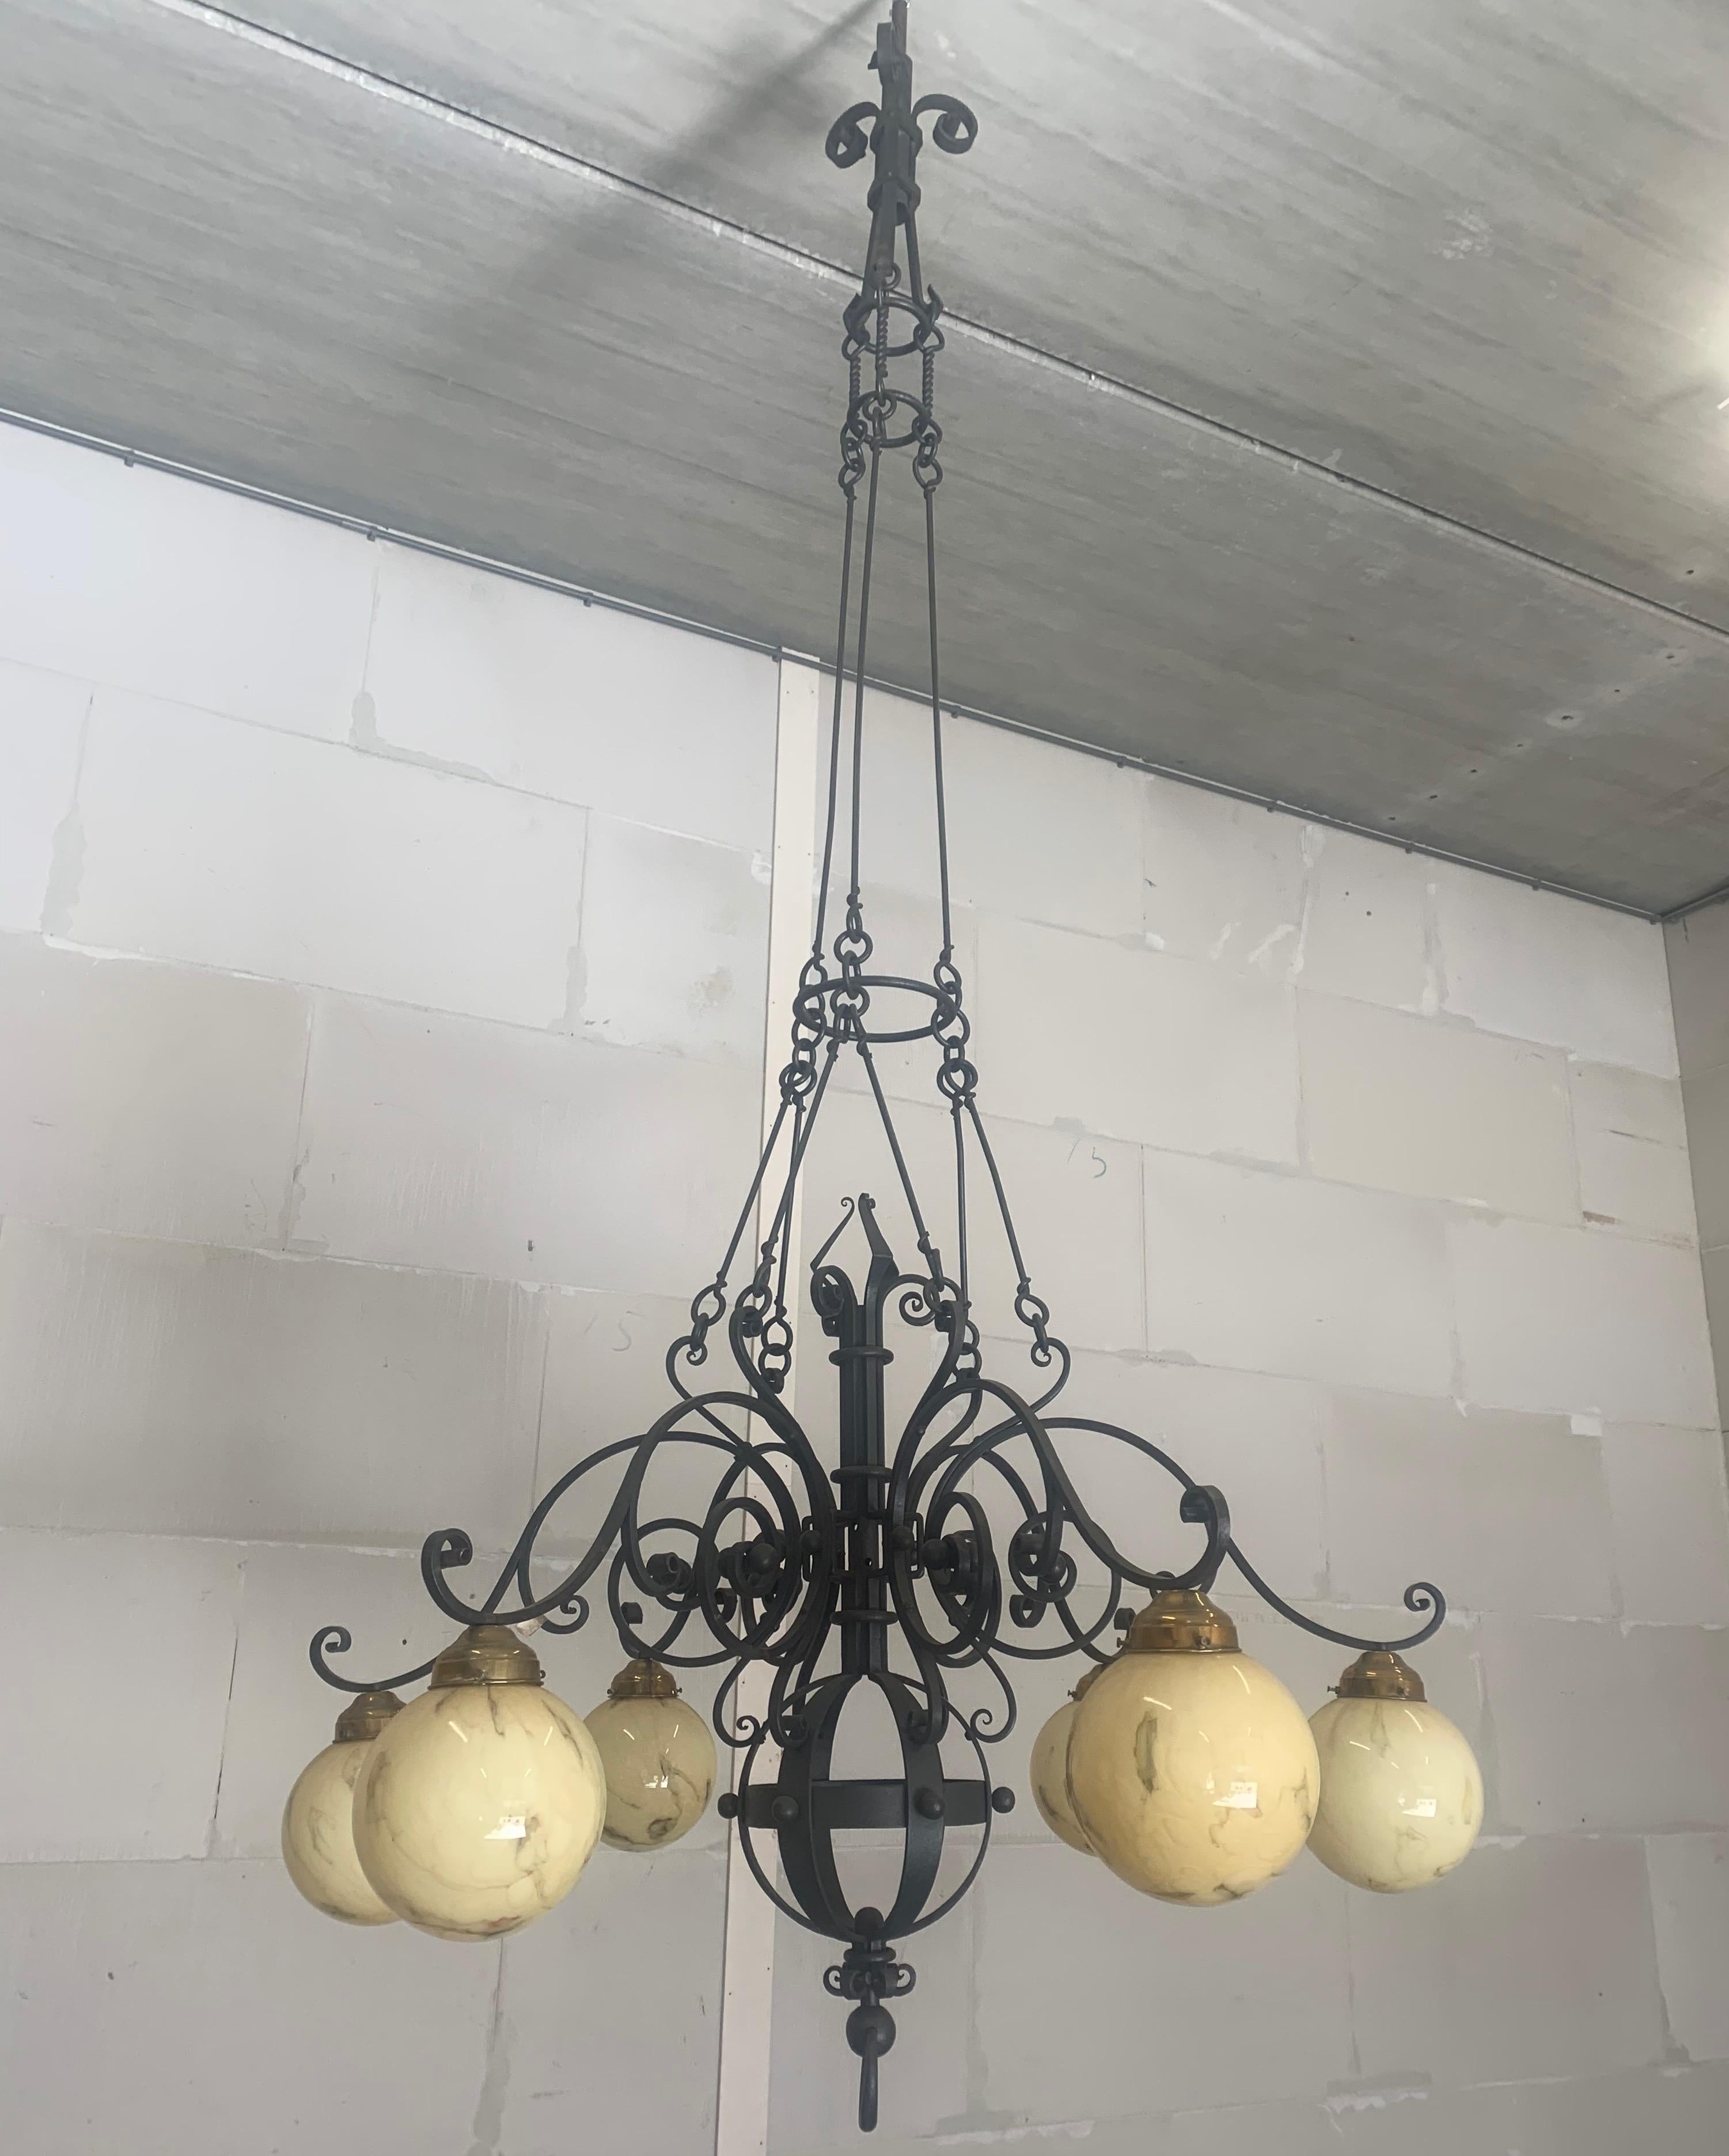 Enormous and all handcrafted, wrought iron light fixture has been hanging in a church.

Amazing quality and size chandelier. This forged in fire mega pendant is of incredible beauty and fit for a king. The size and quality of the workmanship makes